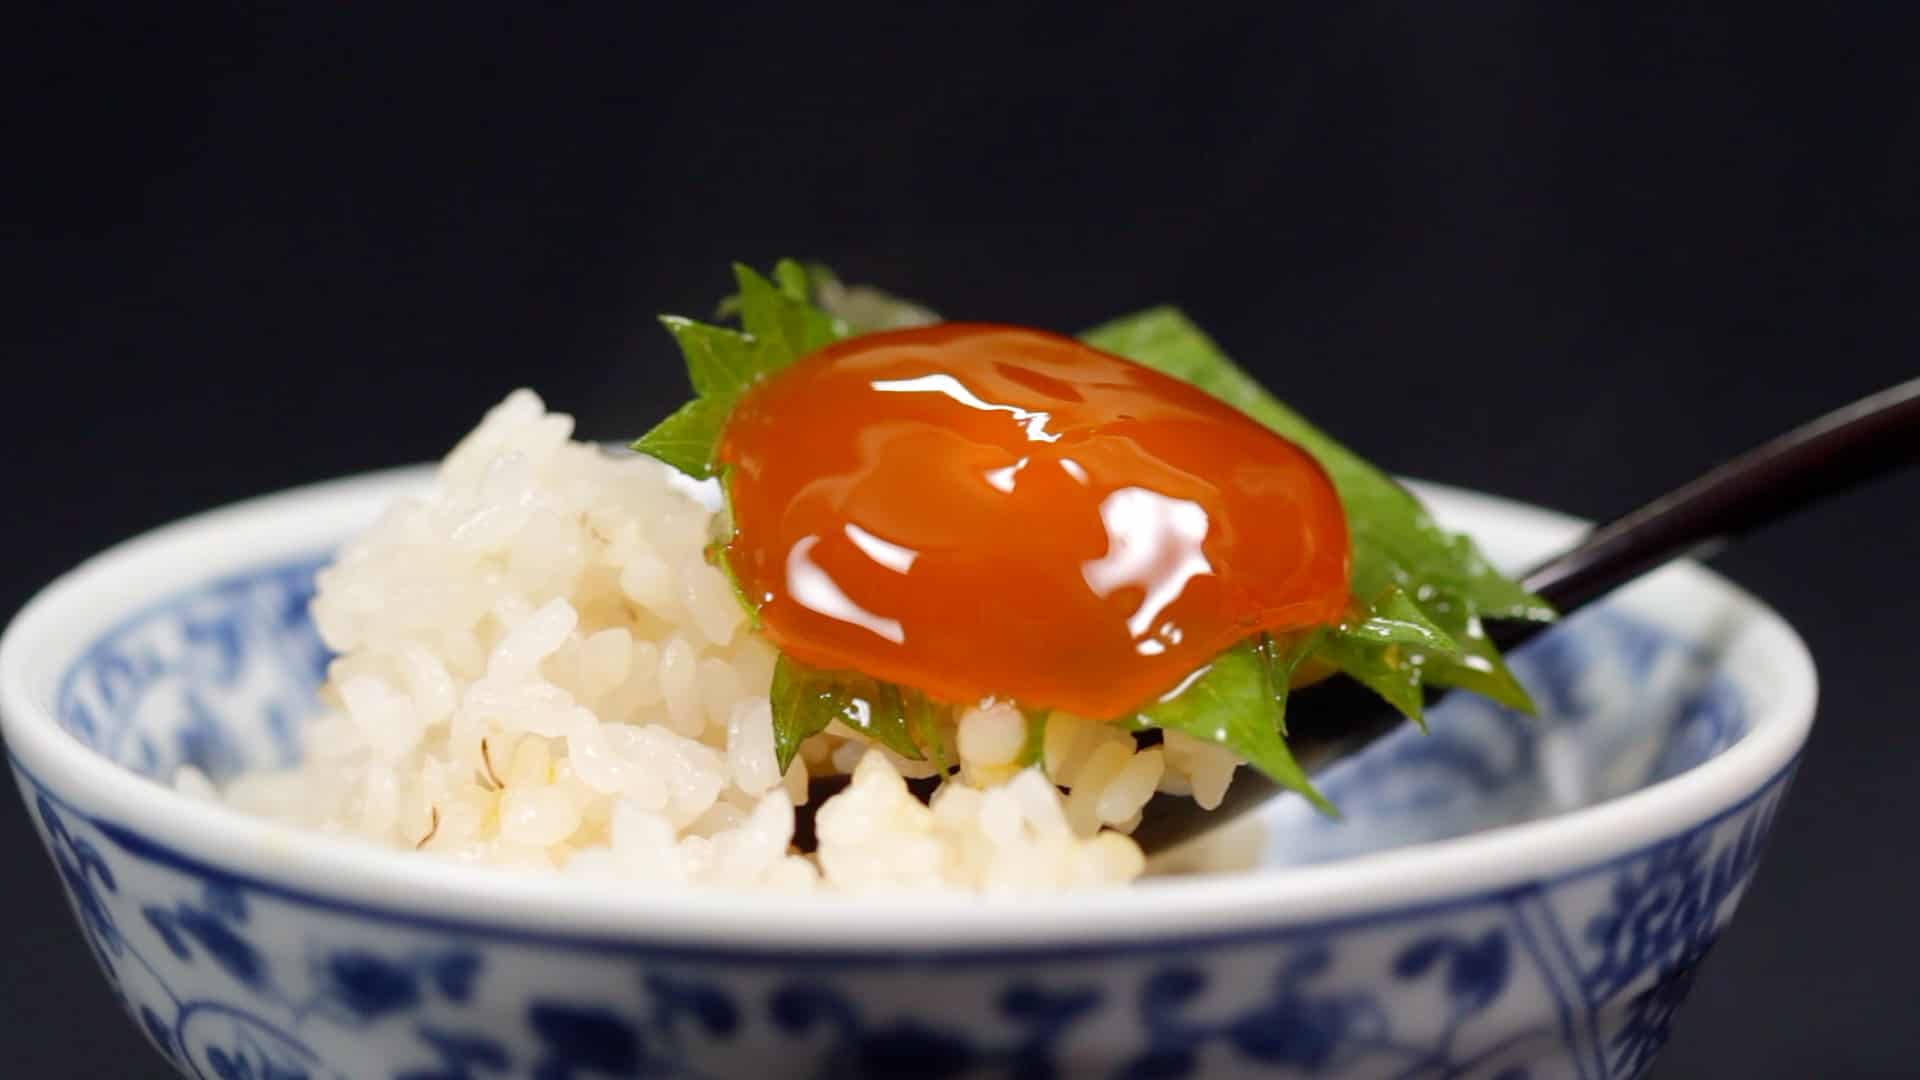 Egg Yolk Misozuke Recipe Egg Yolks And Vegetables Pickled With Miso The Best Snack With Sake And Beer Cooking With Dog